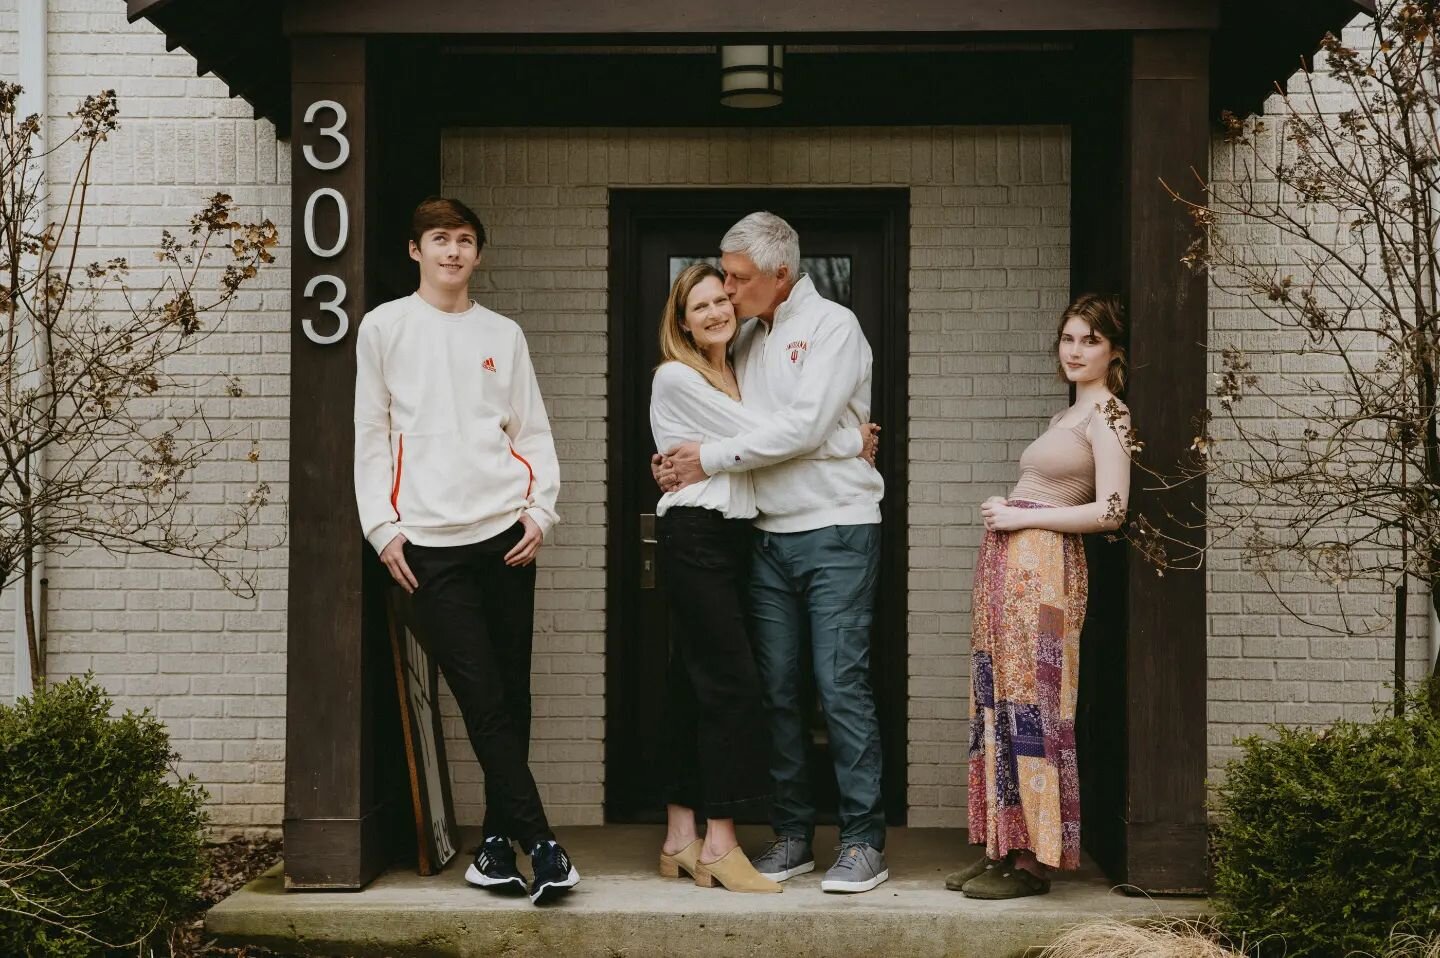 I adore this family portrait and how it seems to capture each of their personalities just as I'd hoped. I loved every minute of working with these lovely humans and can't wait to share more!

Books are open and spots are filling in June in Indy, Bloo